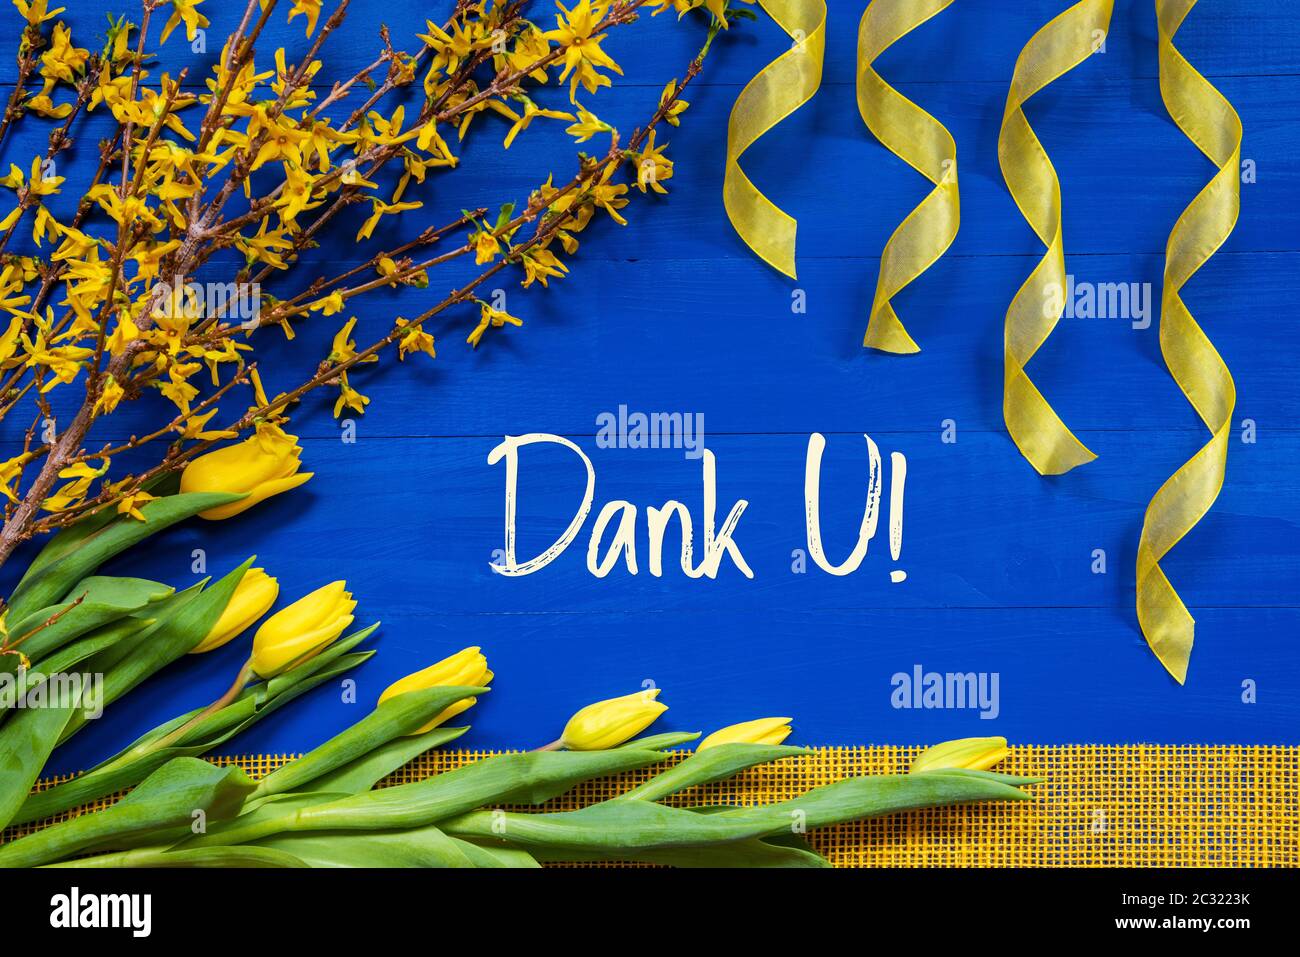 Dutch Text Dank U Means Thank You. Yellow Spring Flowers Like Tulip And Branches. Festive Decoration With Ribbon. Blue Wooden Background Stock Photo